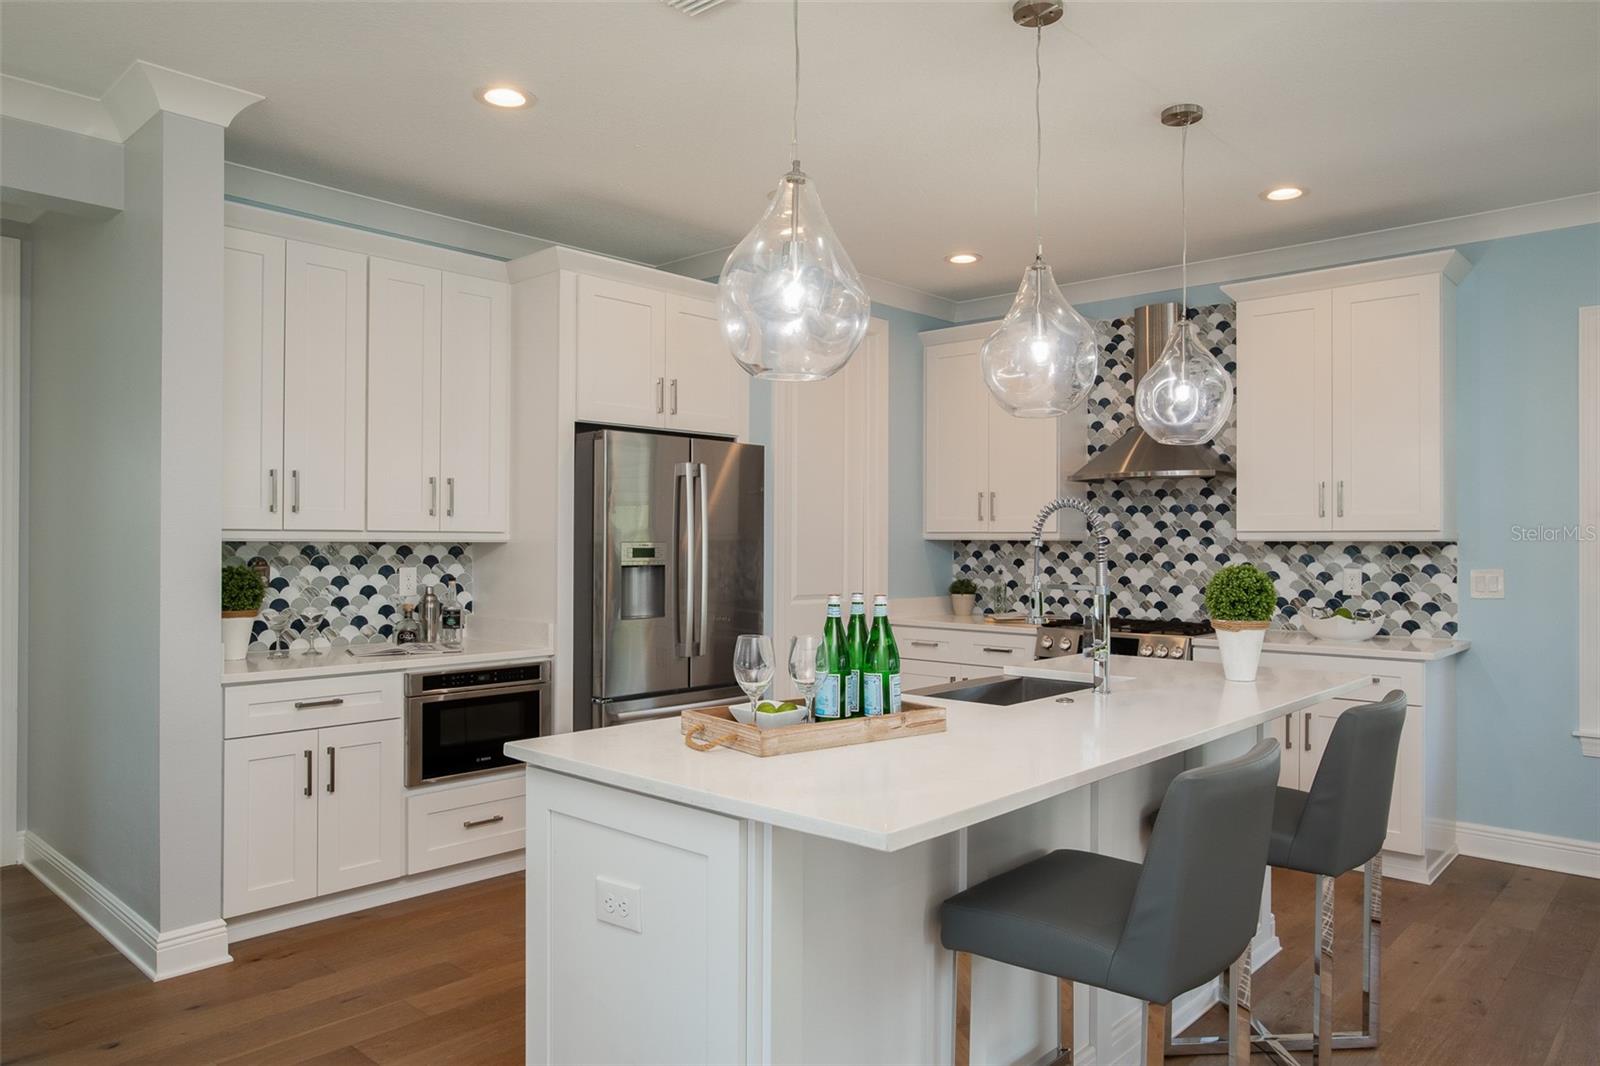 Indulge in the luxury of opulent quartz countertops and top-of-the-line Stainless Steel Bosch appliances, transforming every culinary endeavor into a masterpiece in the heart of your coastal haven.